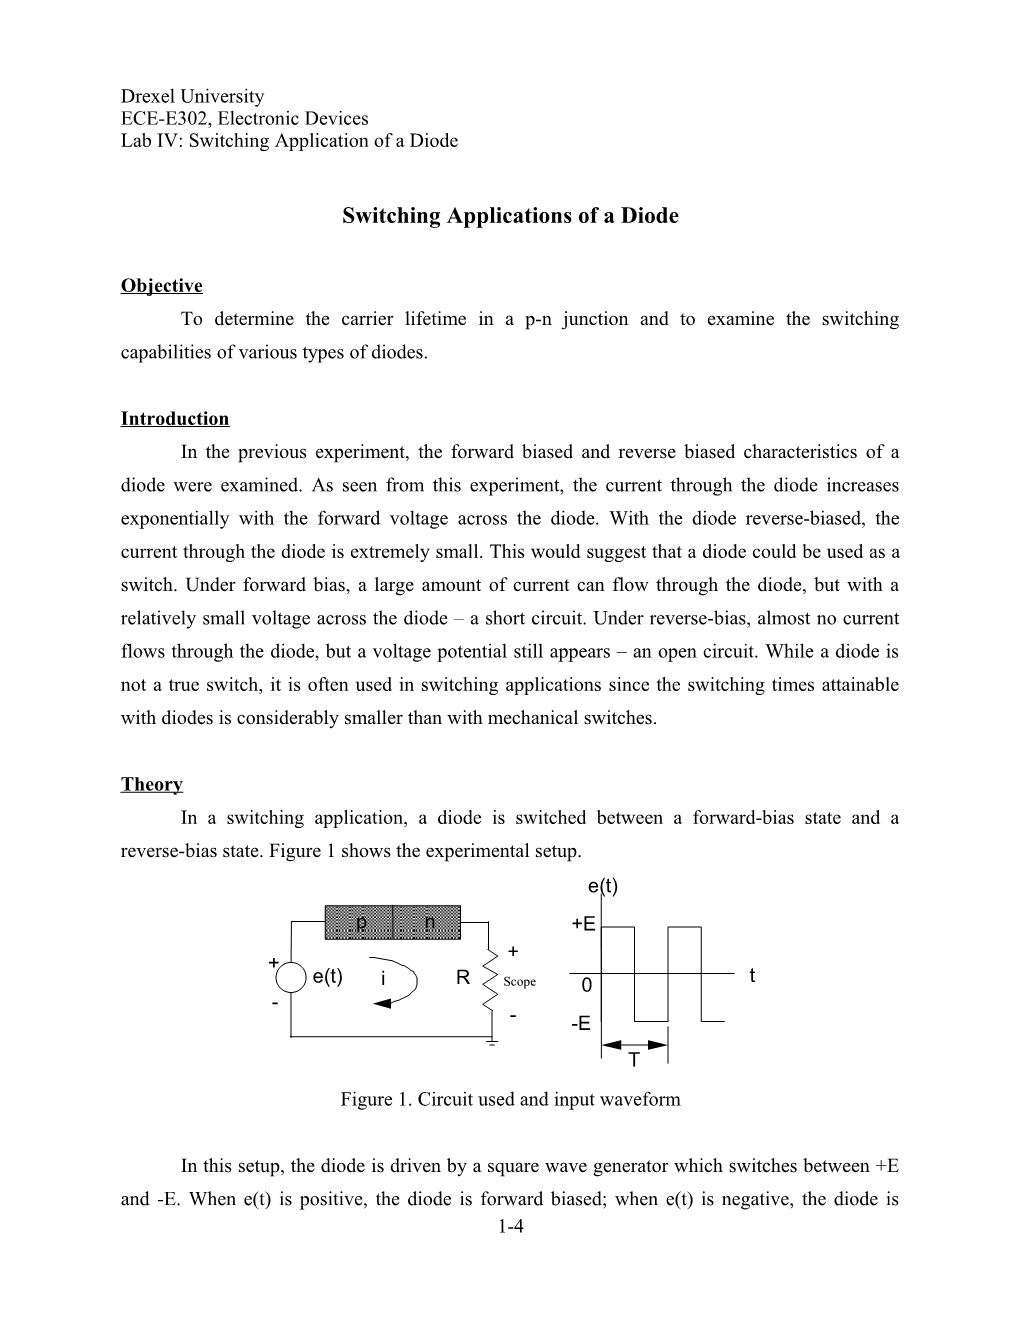 Switching Applications of a Diode